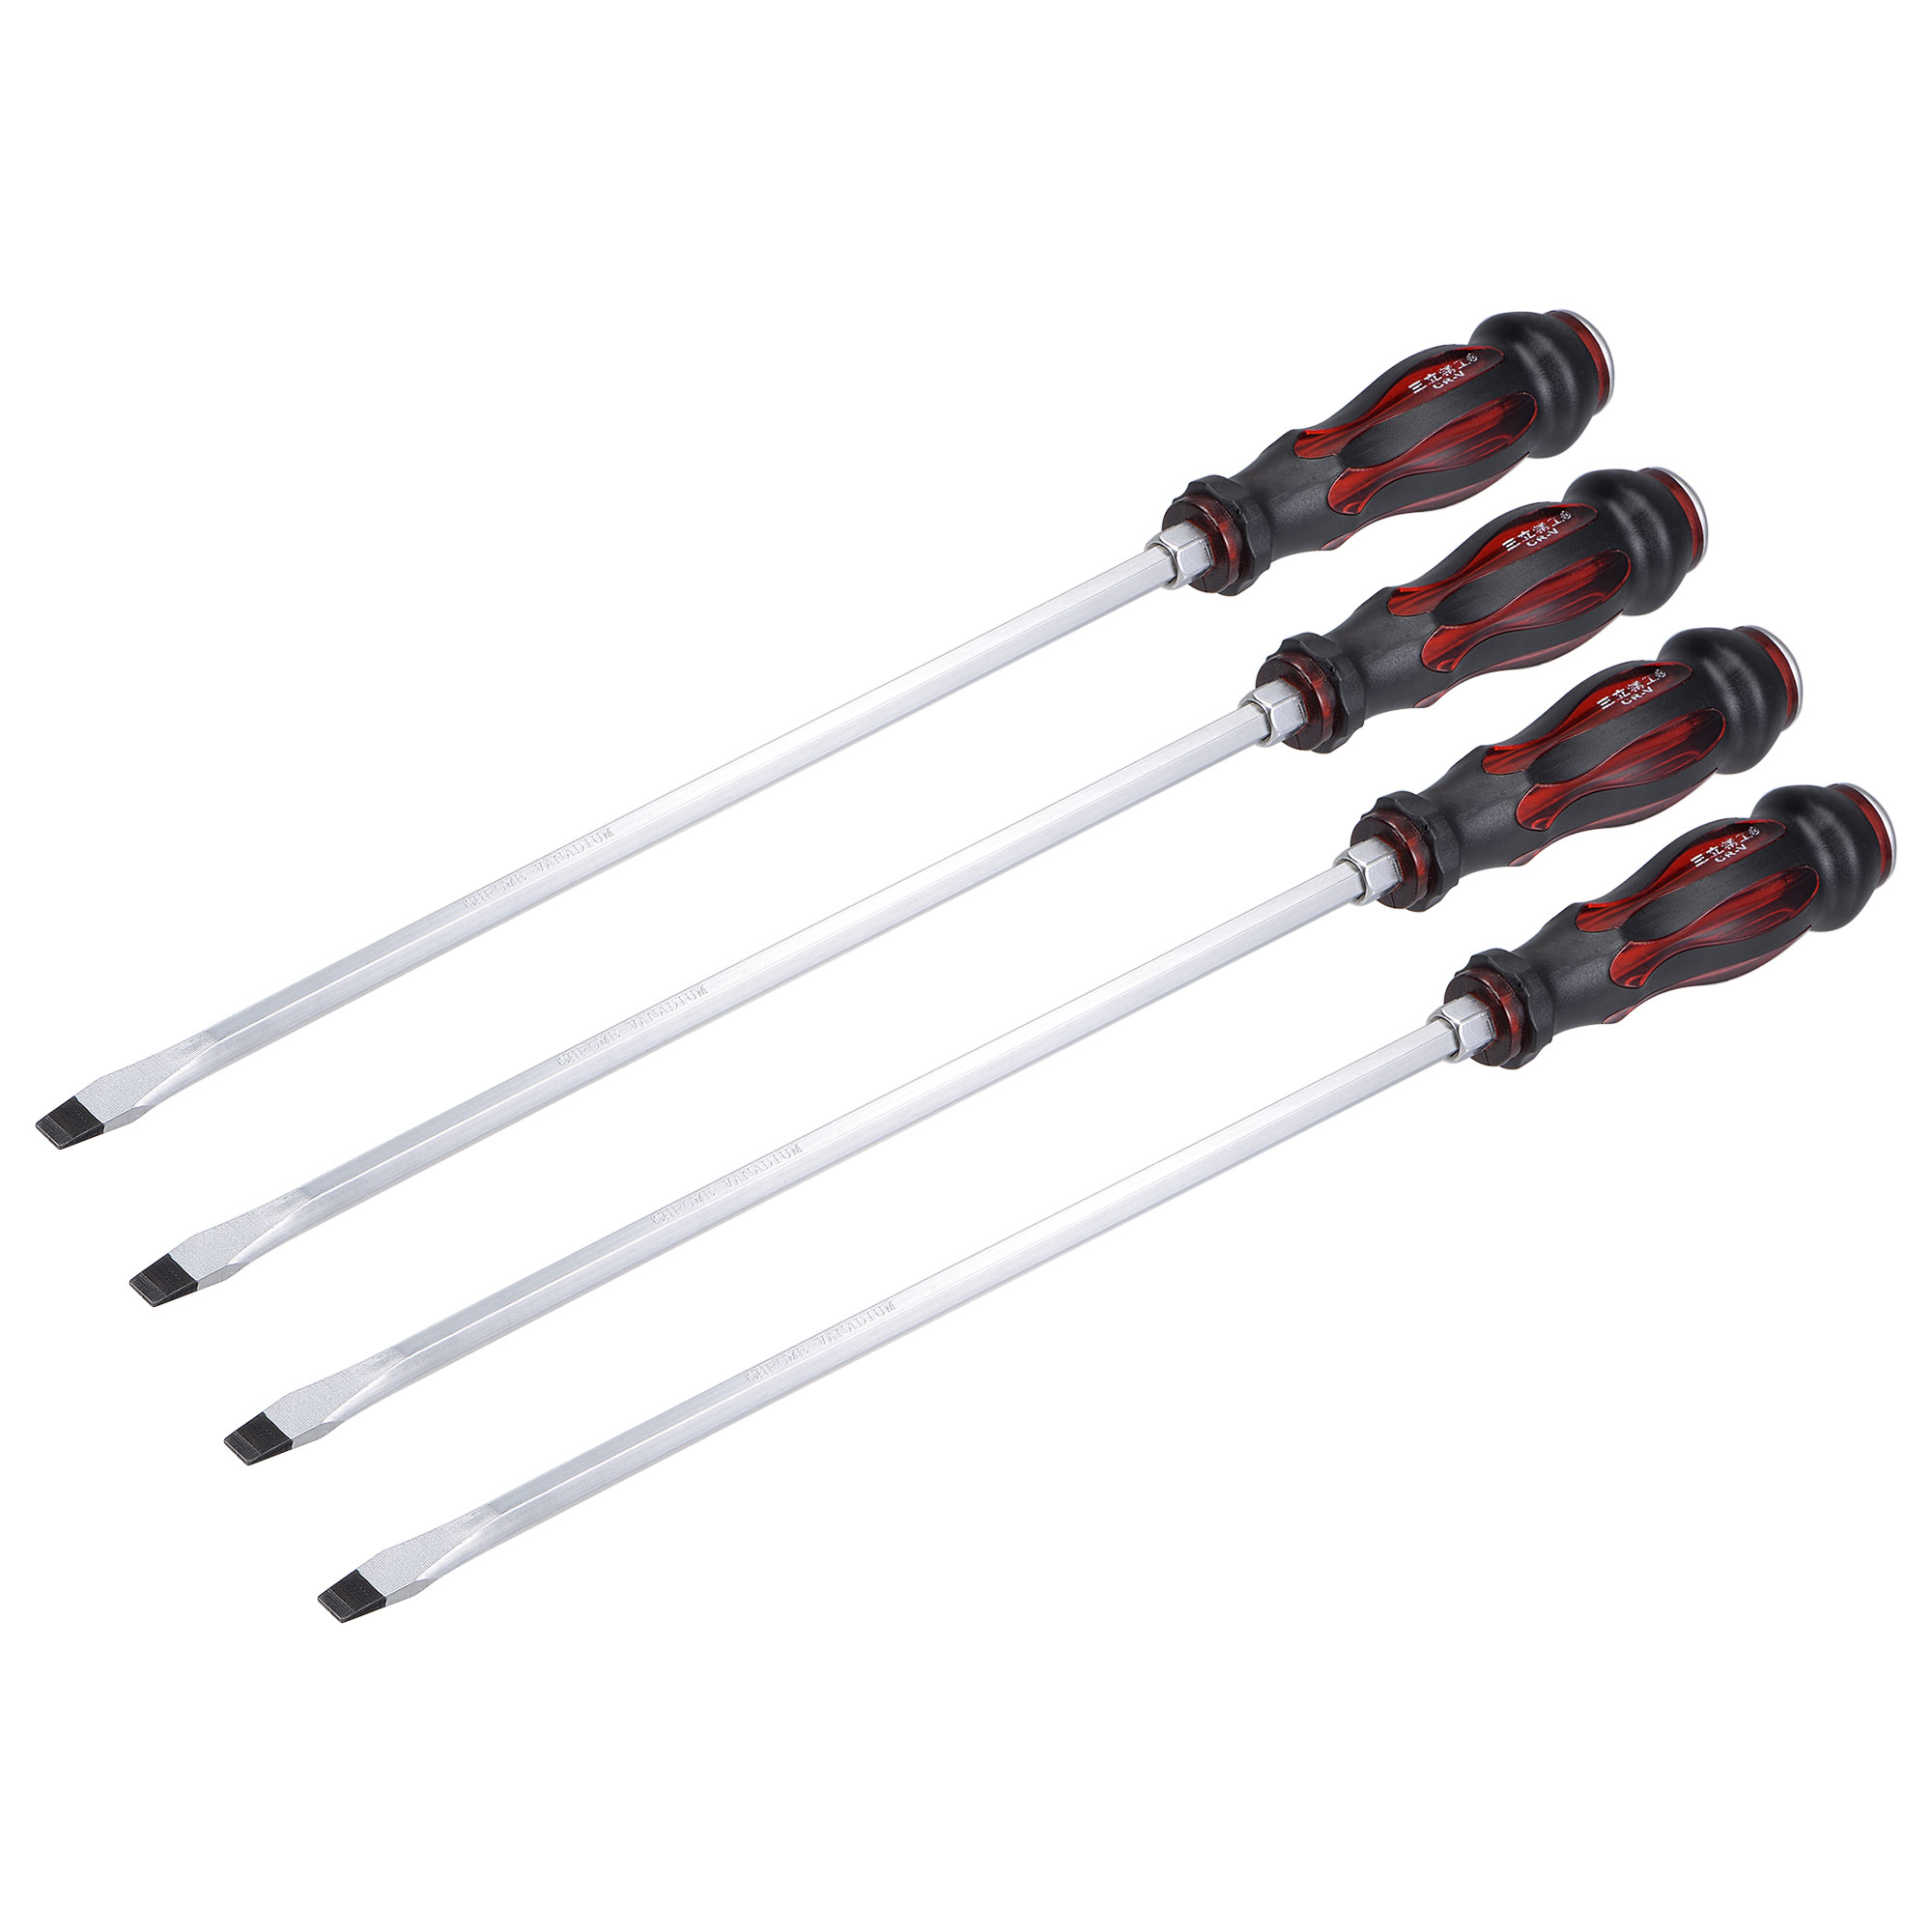 4pcs 8mm Slotted Magnetic Impact Screwdriver 12" Hex Shaft